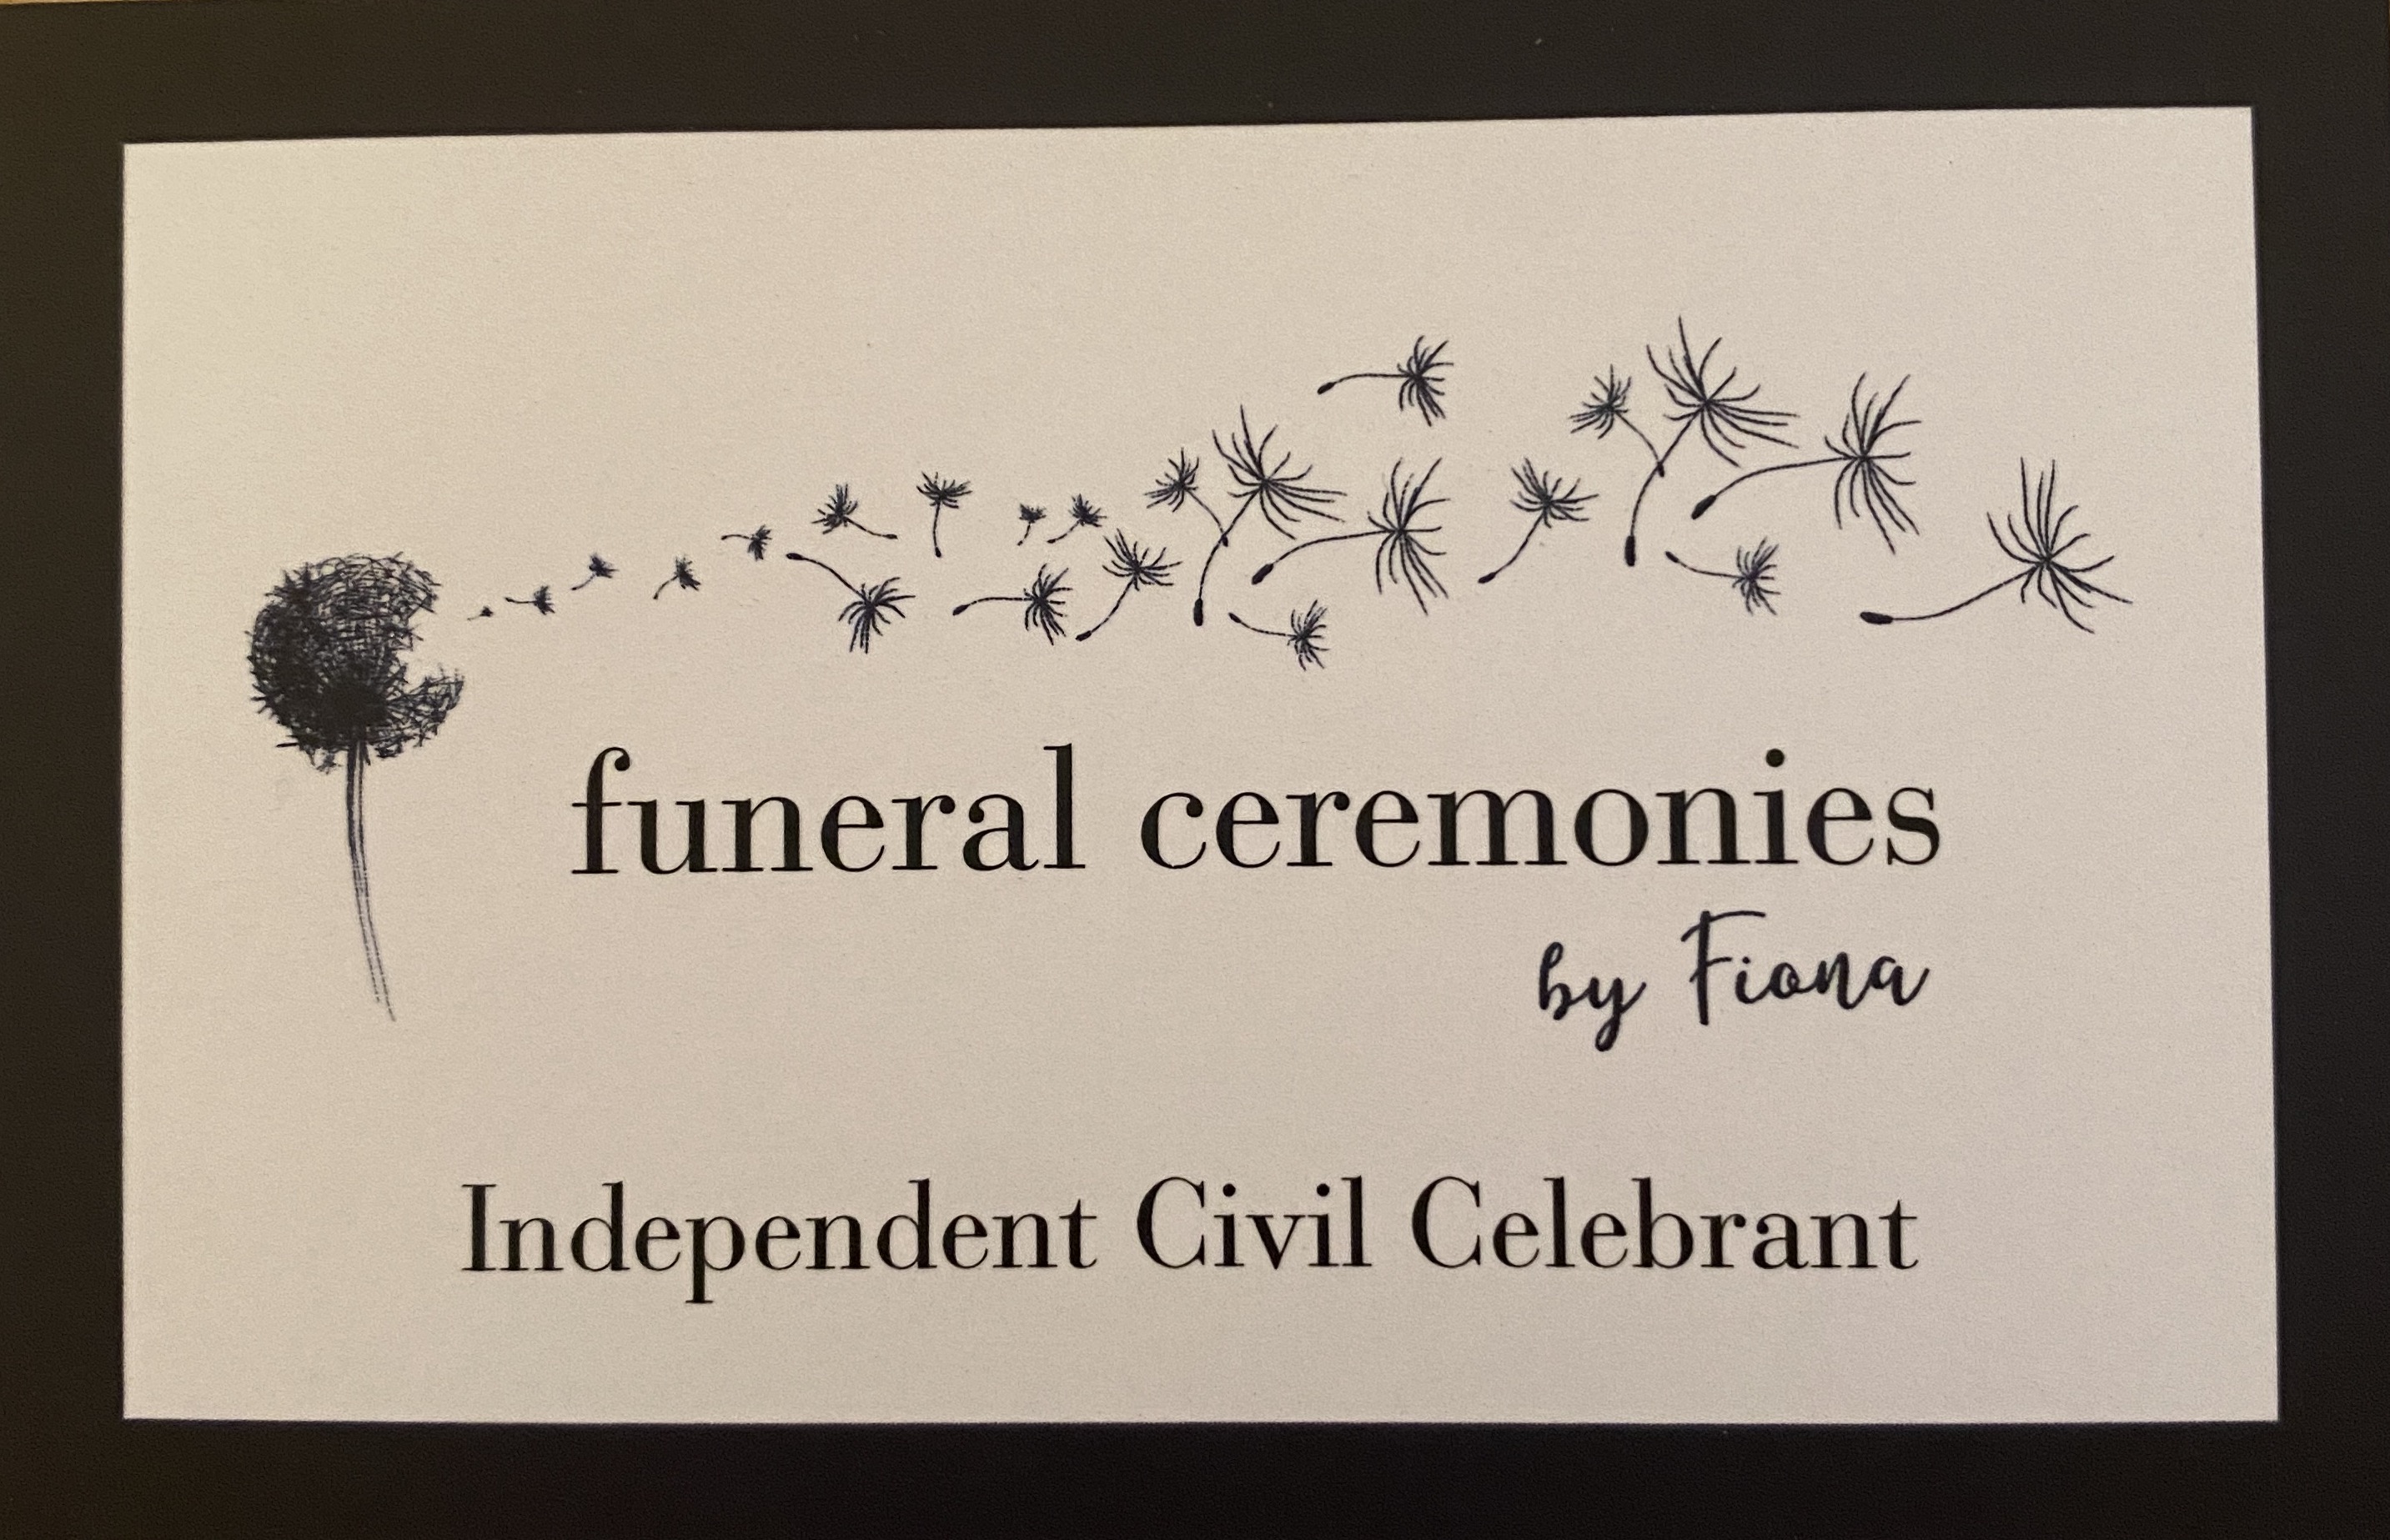 Funeral Ceremonies by Fiona